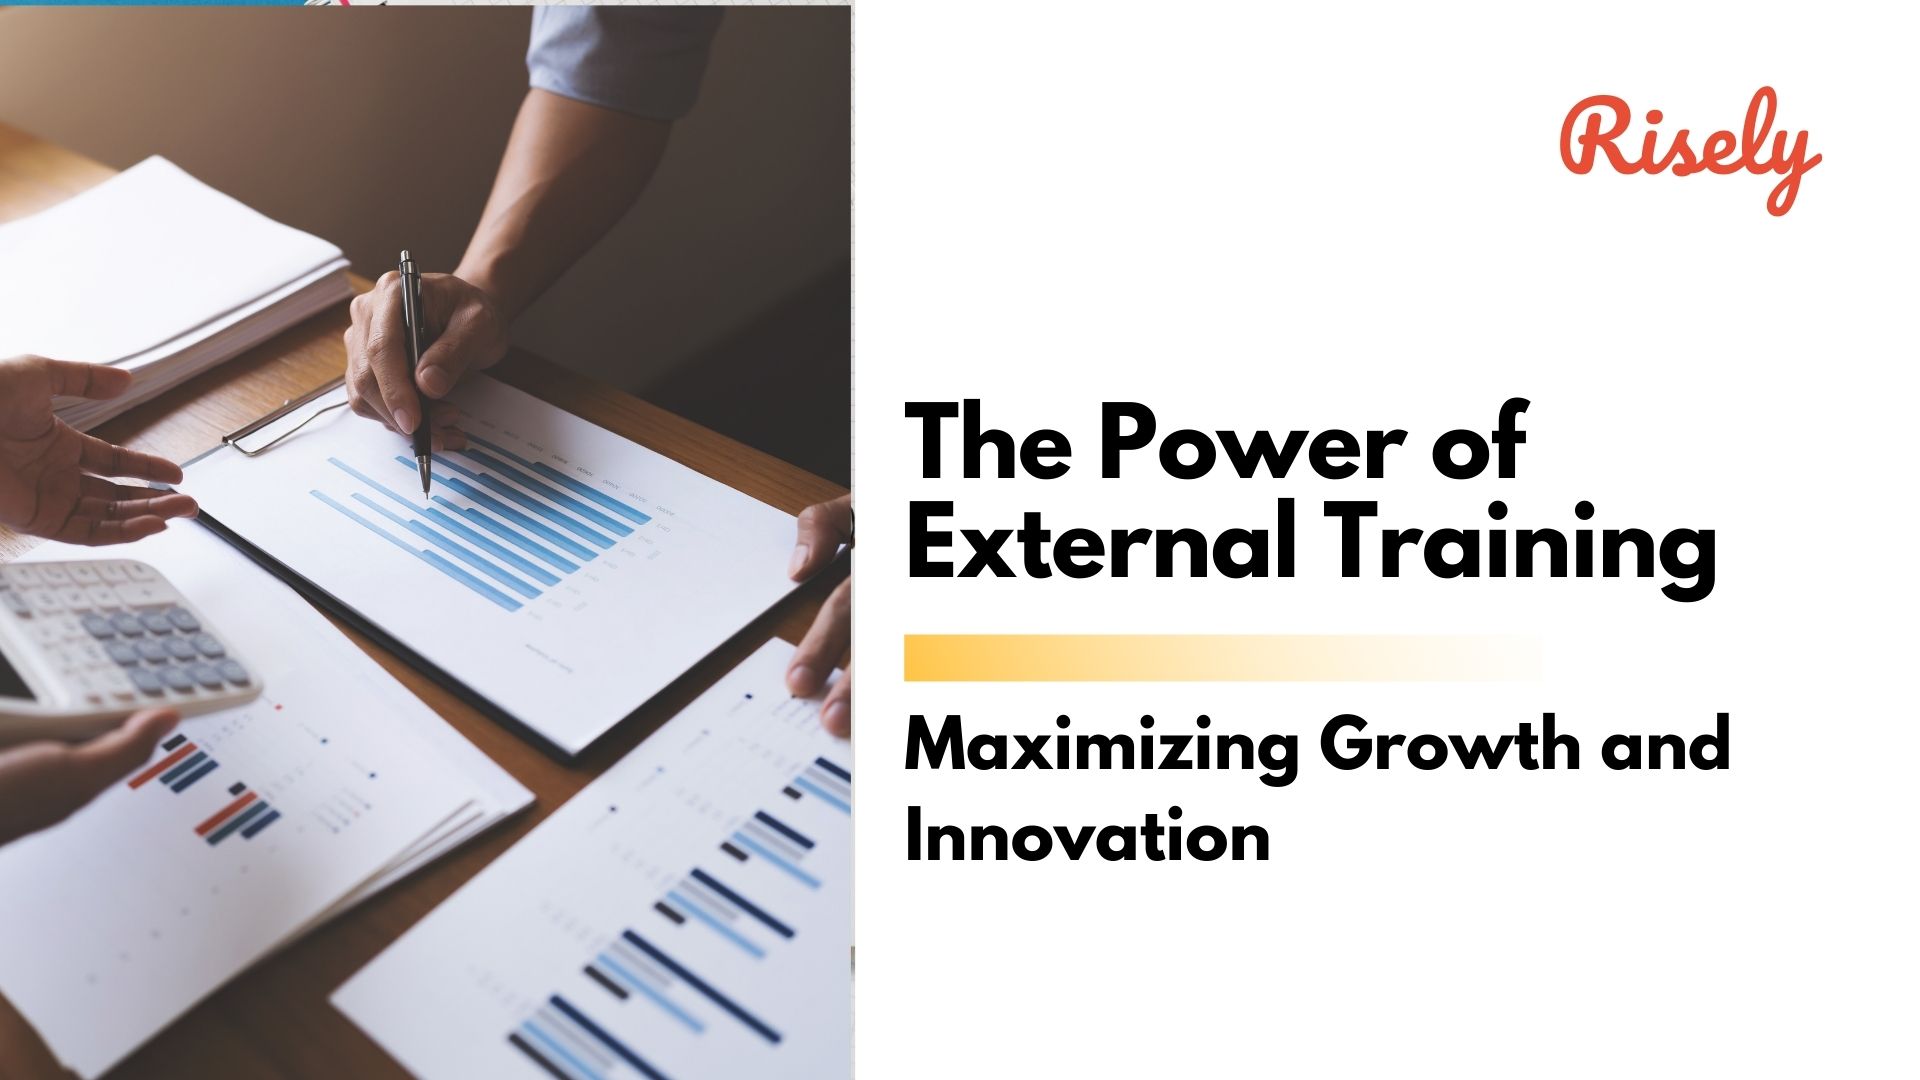 The Power of External Training: Maximizing Growth and Innovation